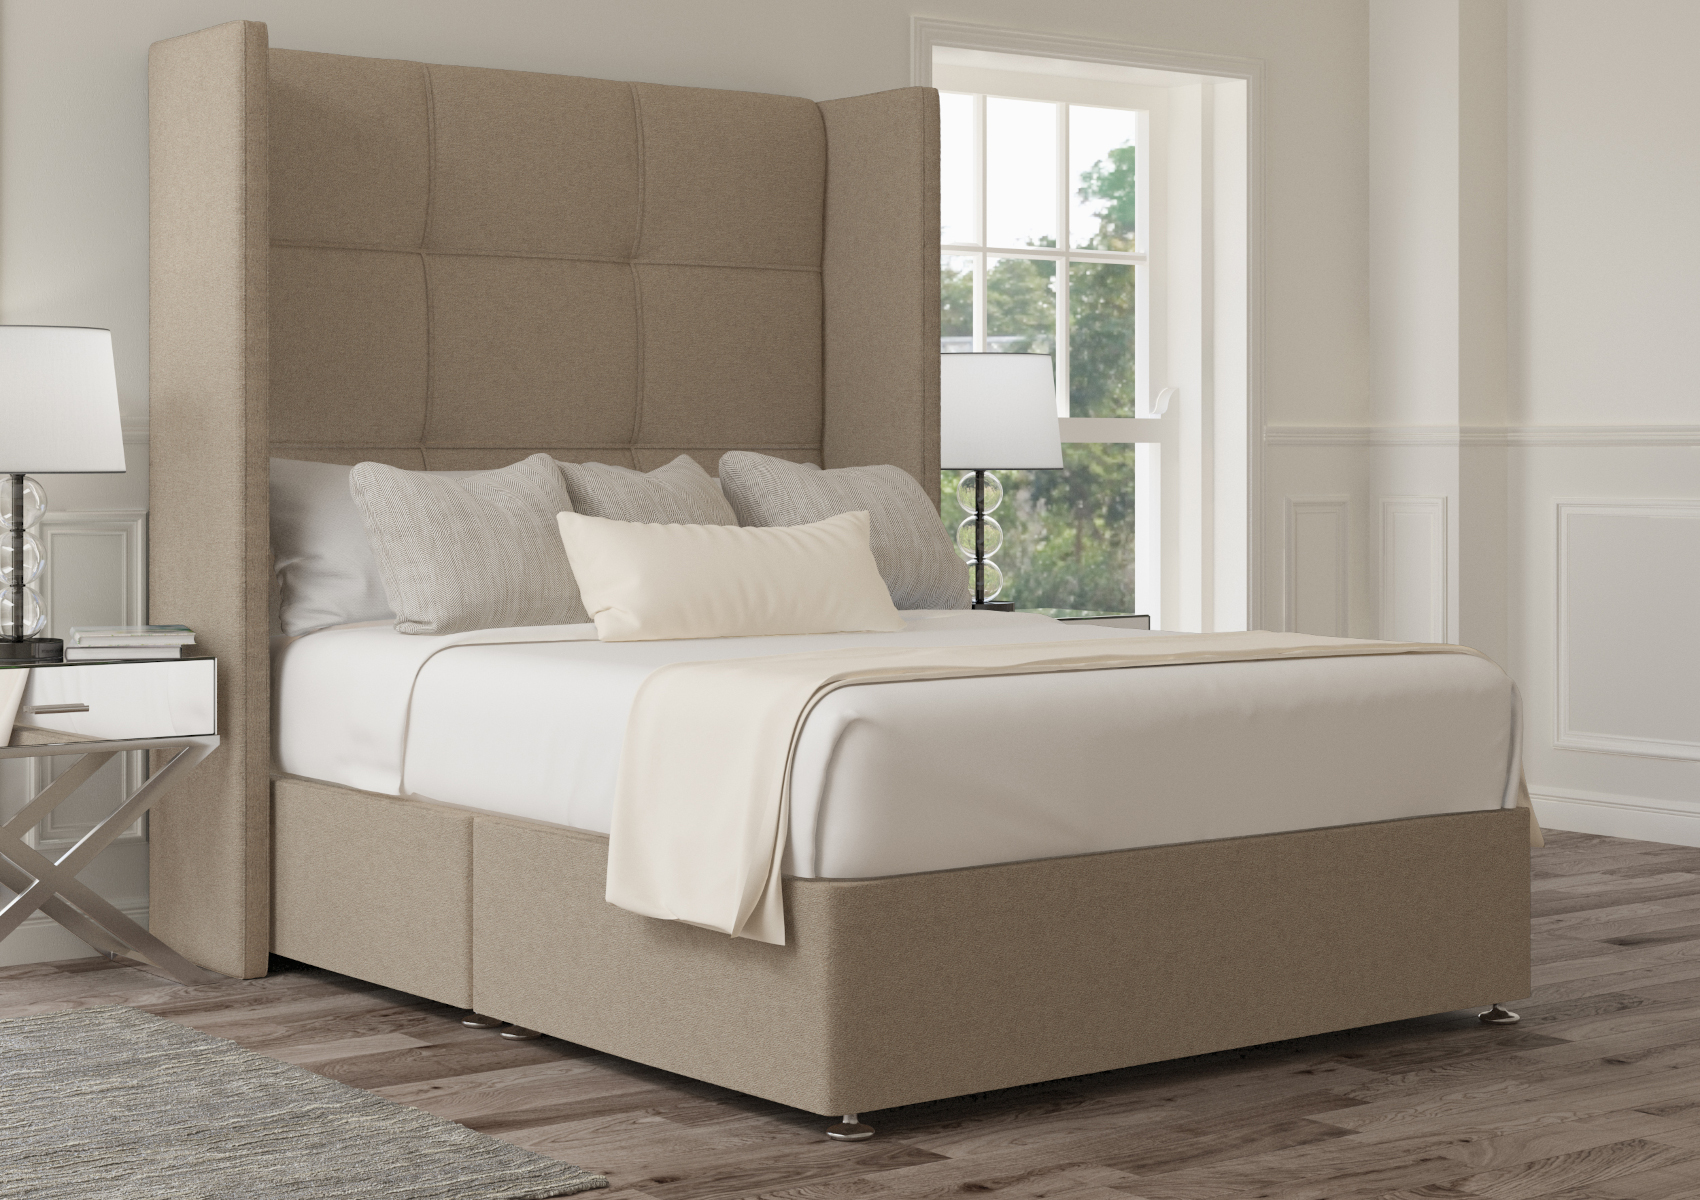 View Oaklyn Arran Pebble Upholstered Double Winged Bed Time4Sleep information